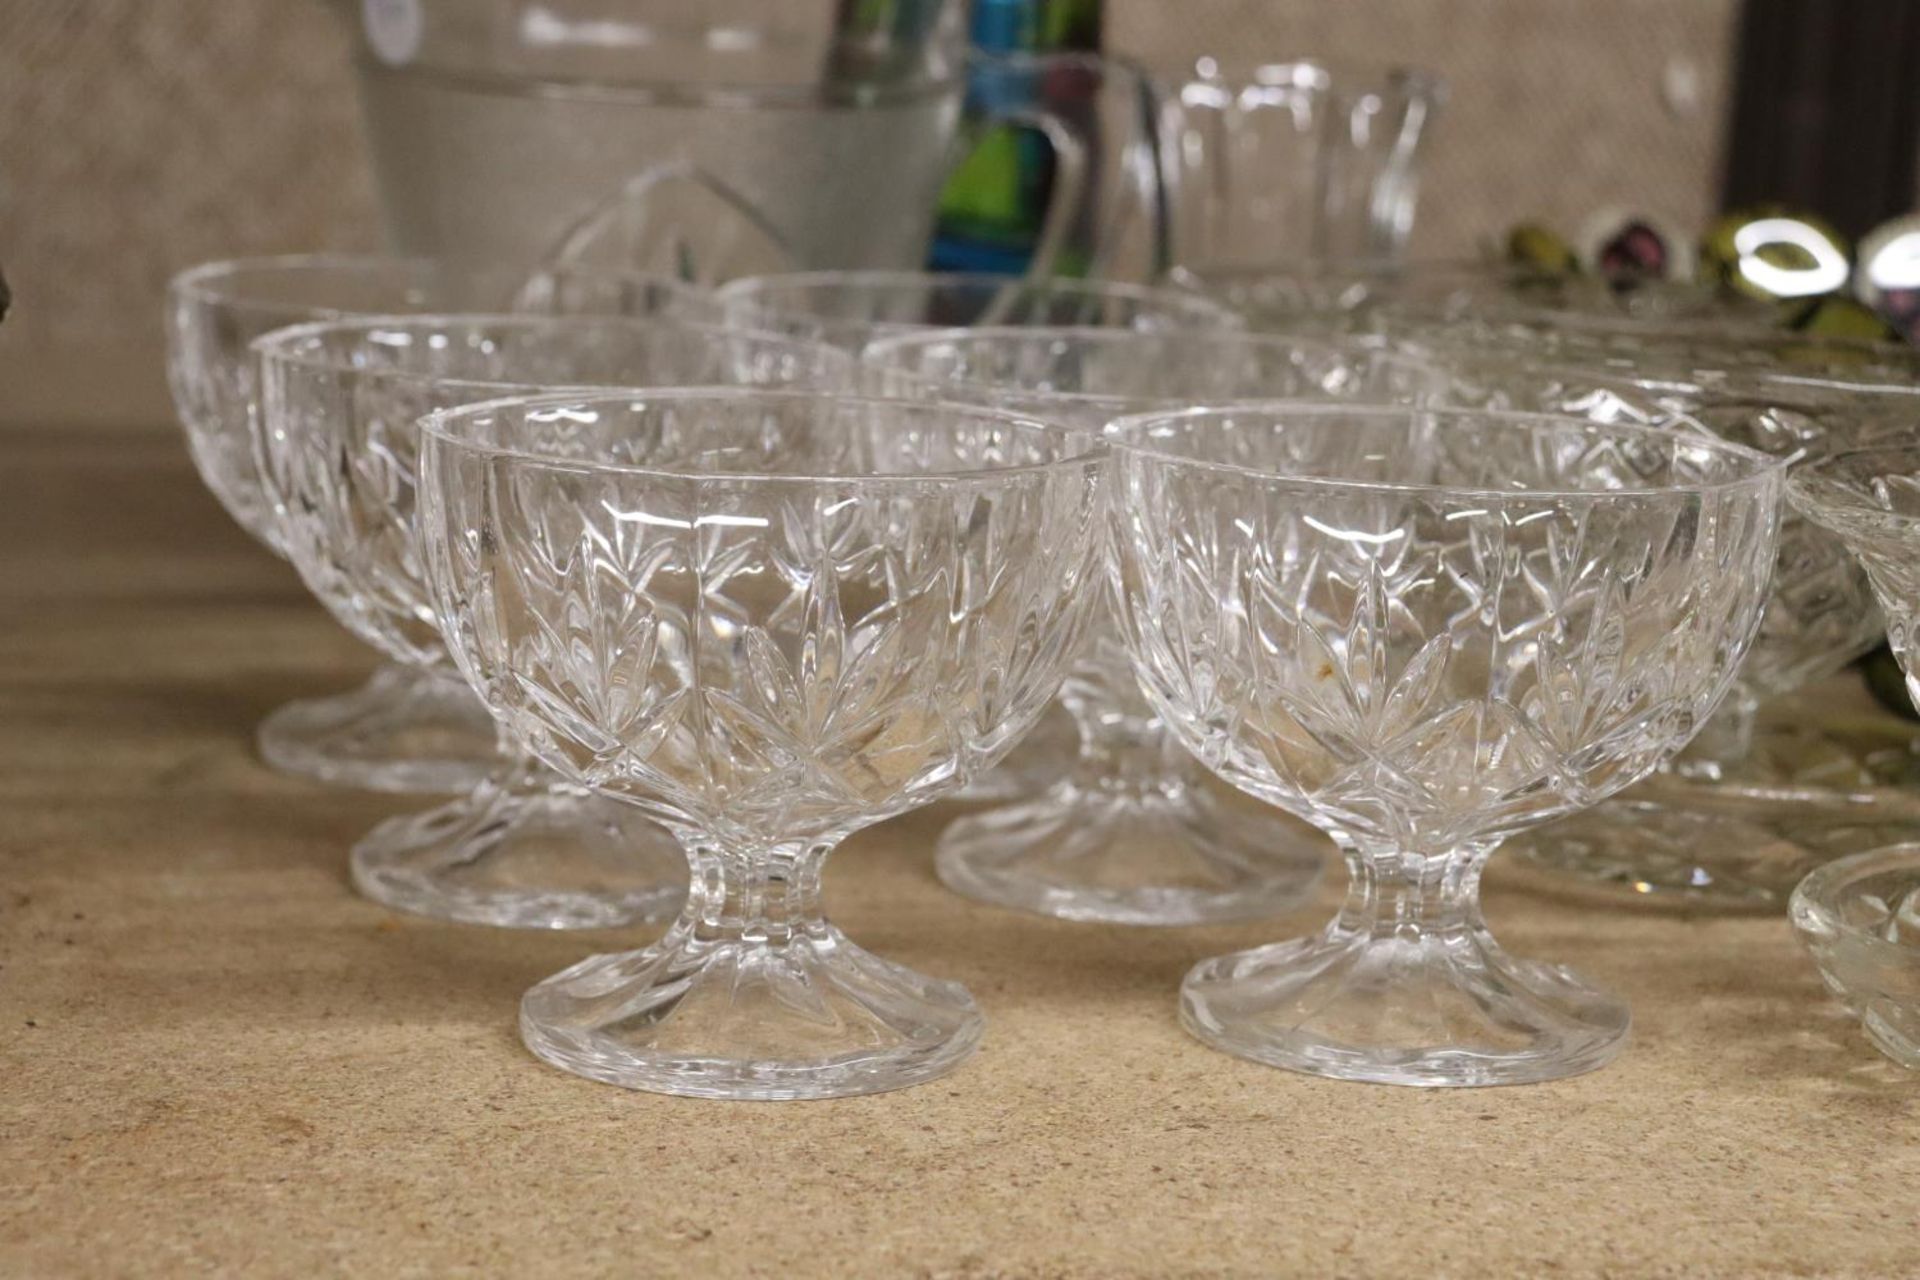 A QUANTITY OF GLASSWARE TO INCLUDE A LARGE COLOURED BOWL, DESSERT BOWLS, A JUG, ETC - Image 2 of 7